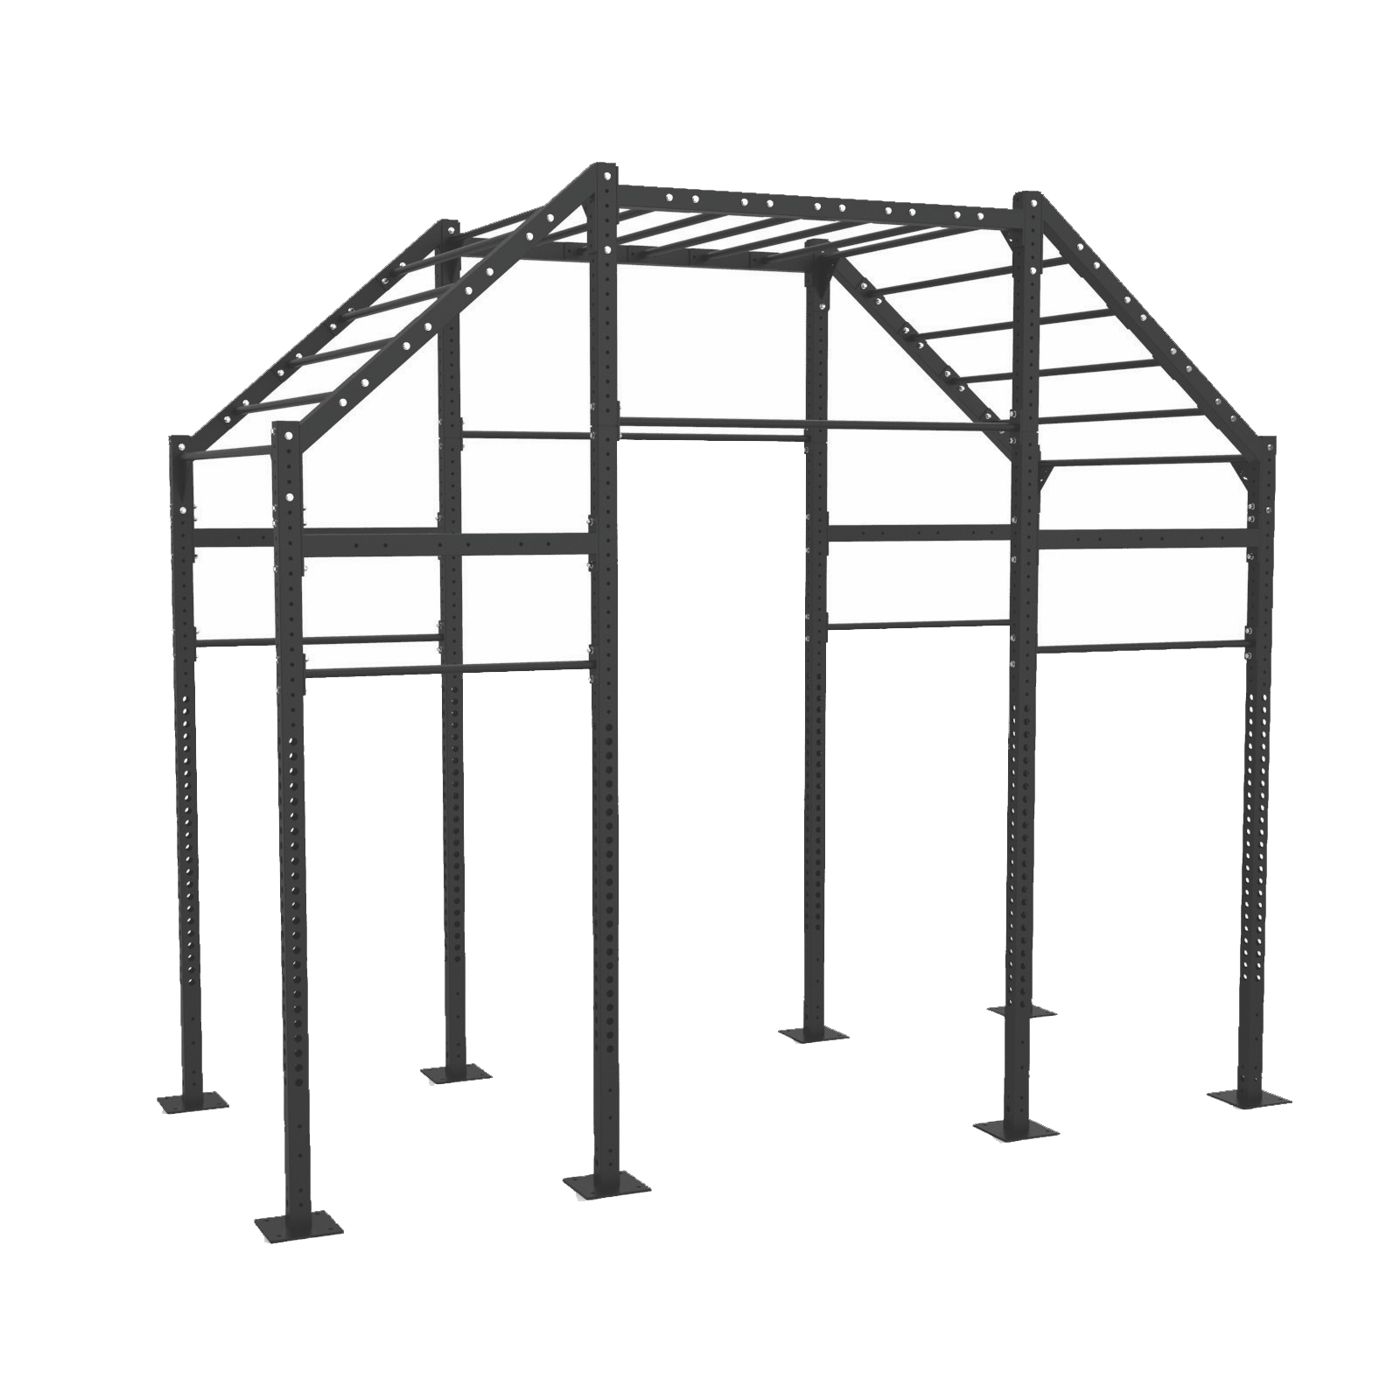 Cage Functional structure BR-6R464 - 4,05x1,80x3,65m Amaya Sport